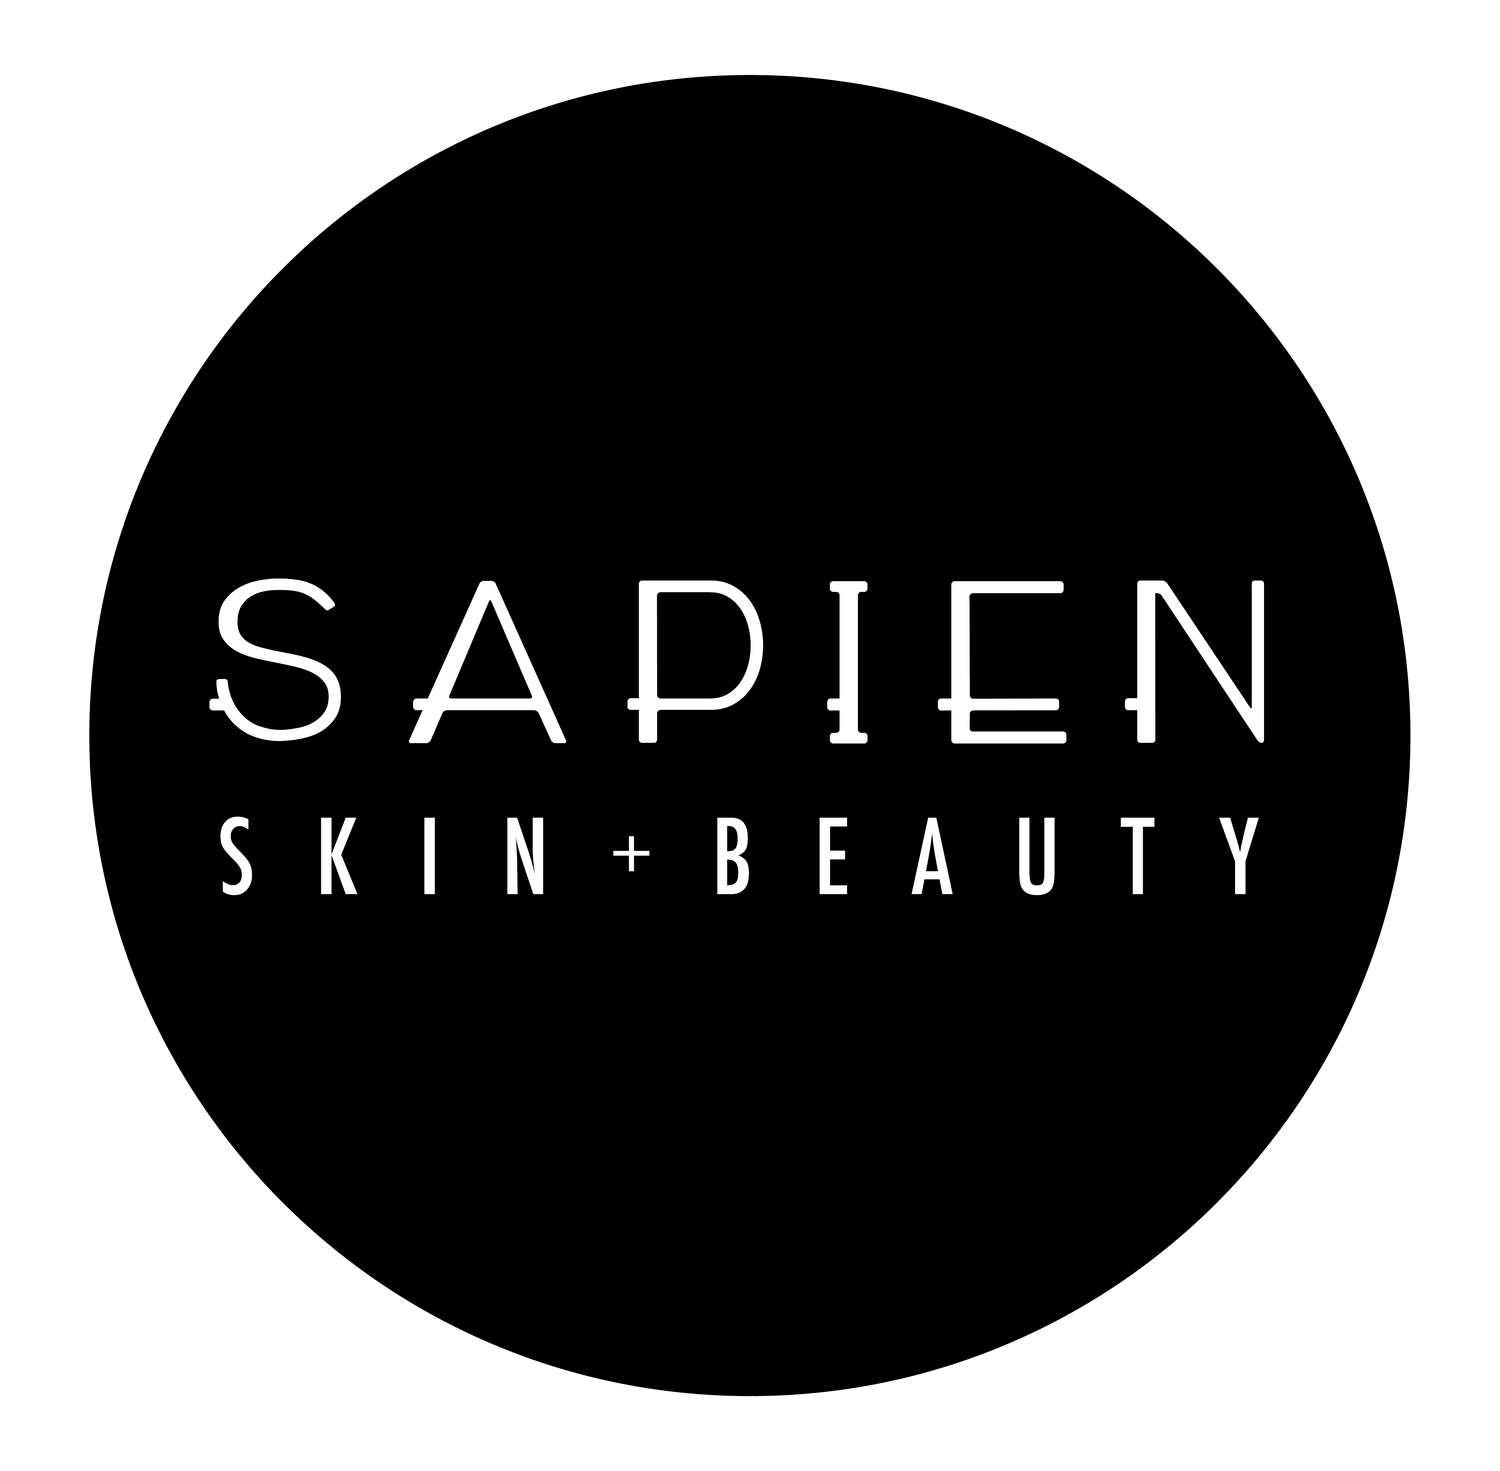 Physical Gift Wrapped Sapien Skin + Beauty Online Store Gift Card